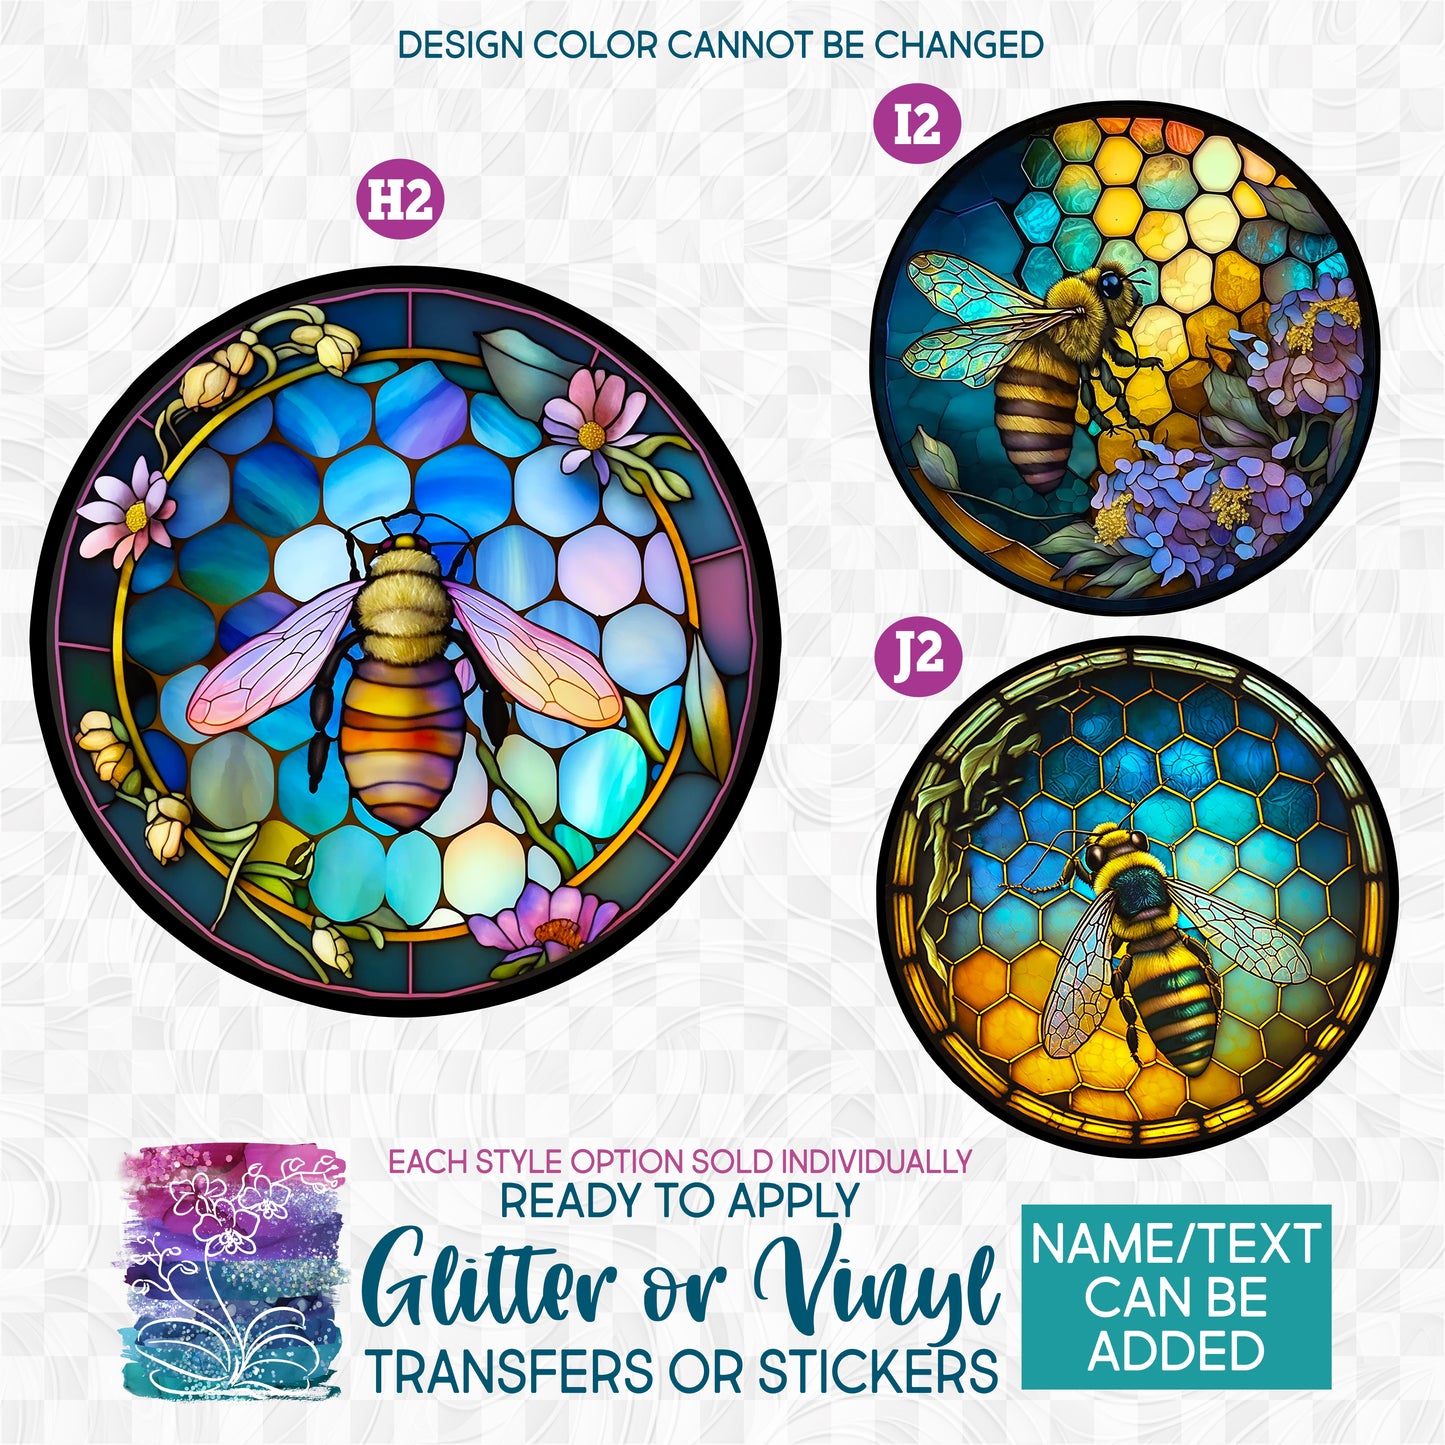 (s150-09) Stained-Glass Honey Bee 7 Glitter or Vinyl Iron-On Transfer or Sticker